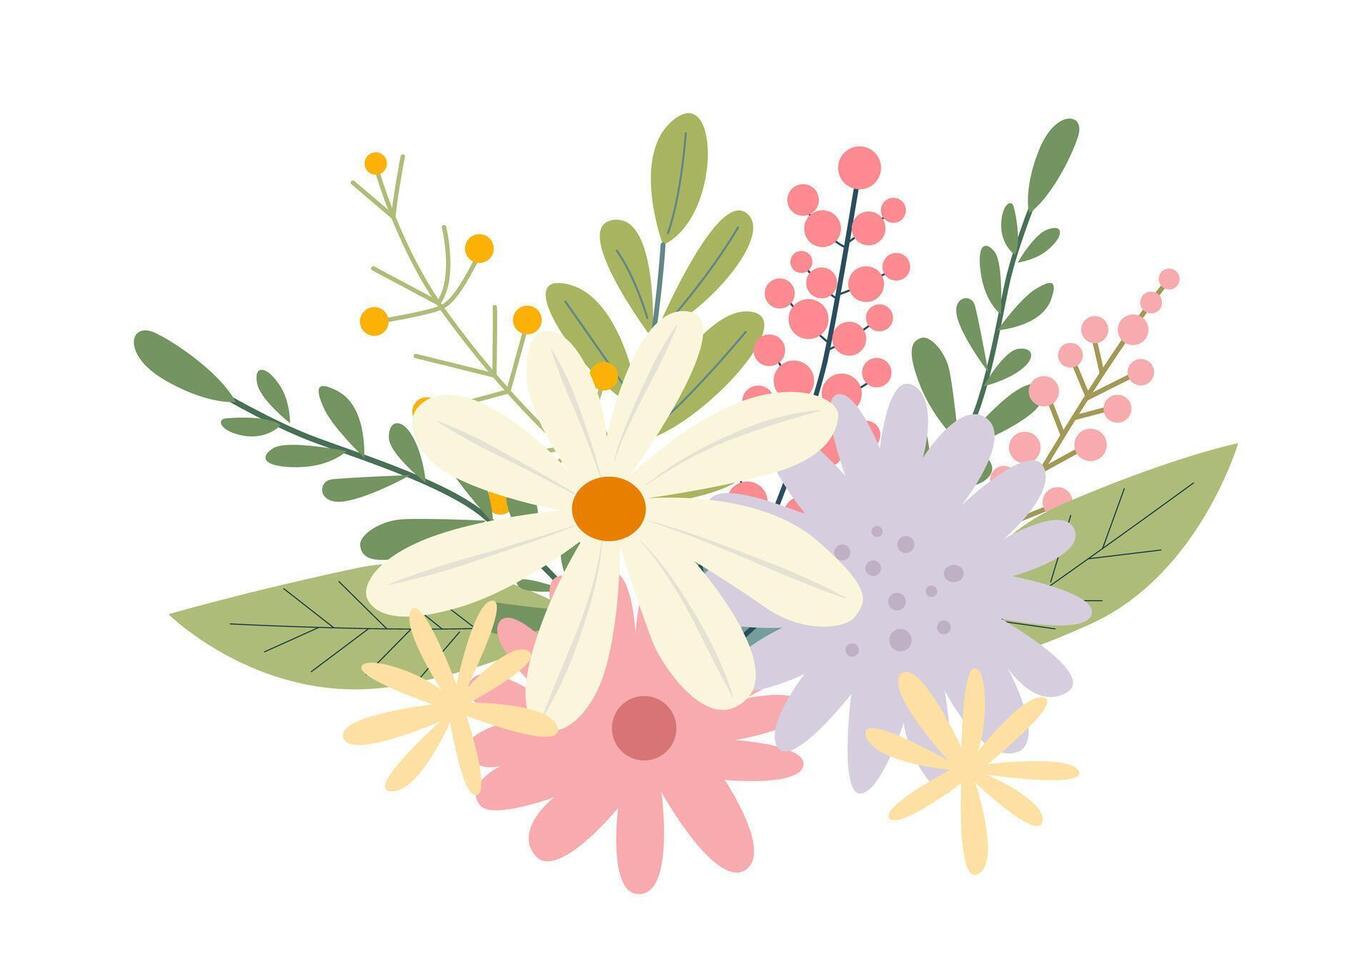 Beautiful spring or summer bouquet on a white background. Cute hand drawn flat vector flowers, leaves, berries. Vector illustration for card, banner, poster, wedding invitation. Floral spring poster.